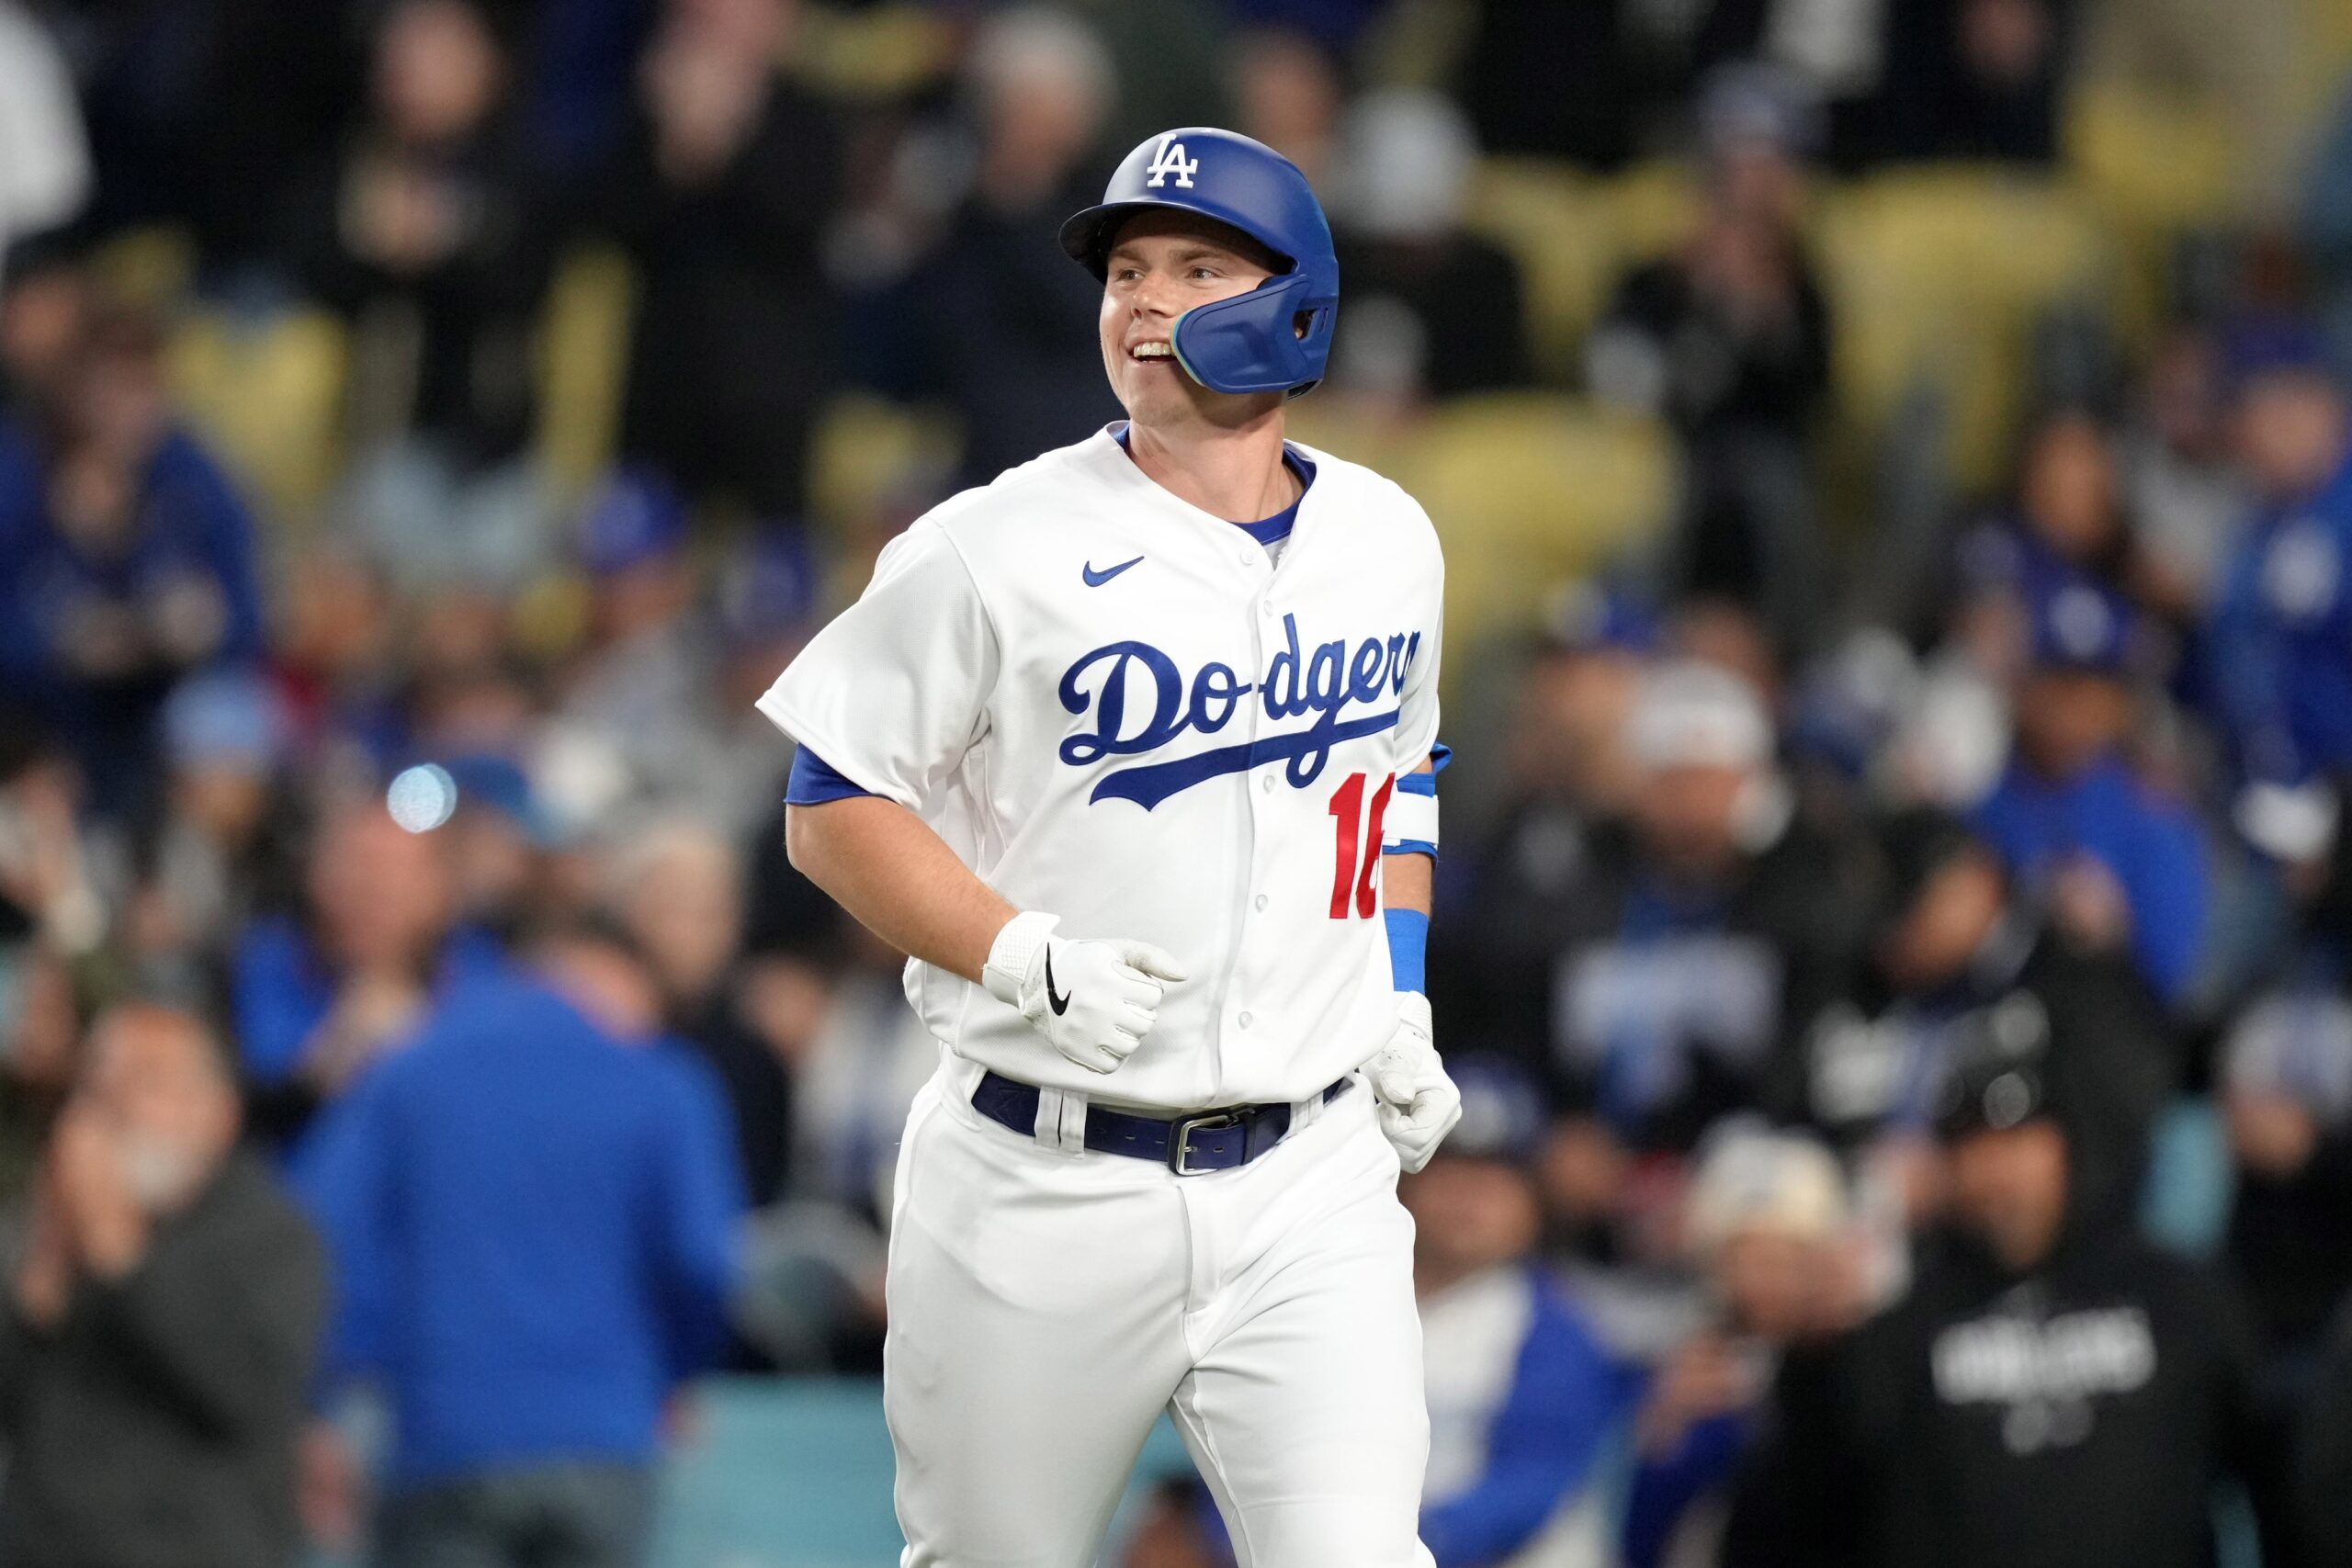 Dodgers News: Will Smith Continues To Look For Ways To Improve His Game